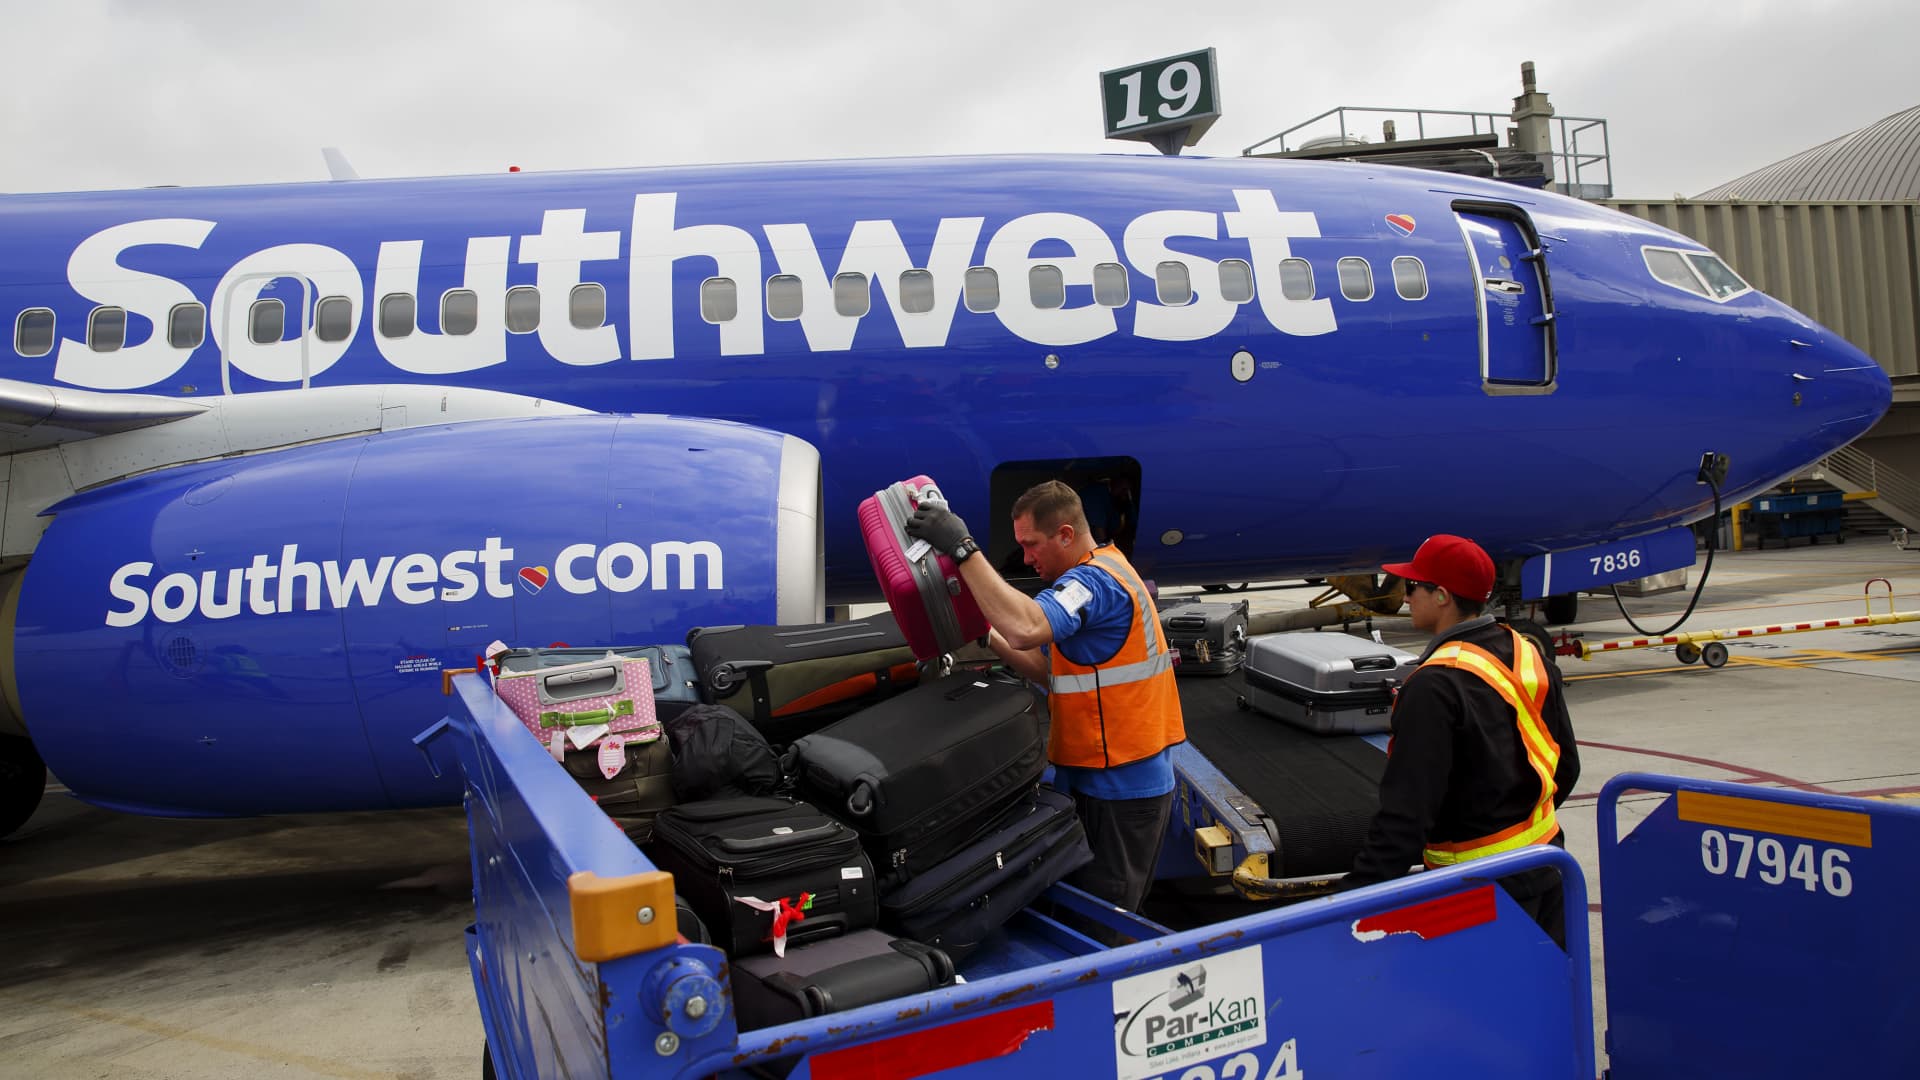 Ground operations employees load baggage onto a Southwest Airlines Boeing 737 aircraft on the tarmac at John Wayne Airport in Santa Ana, California.